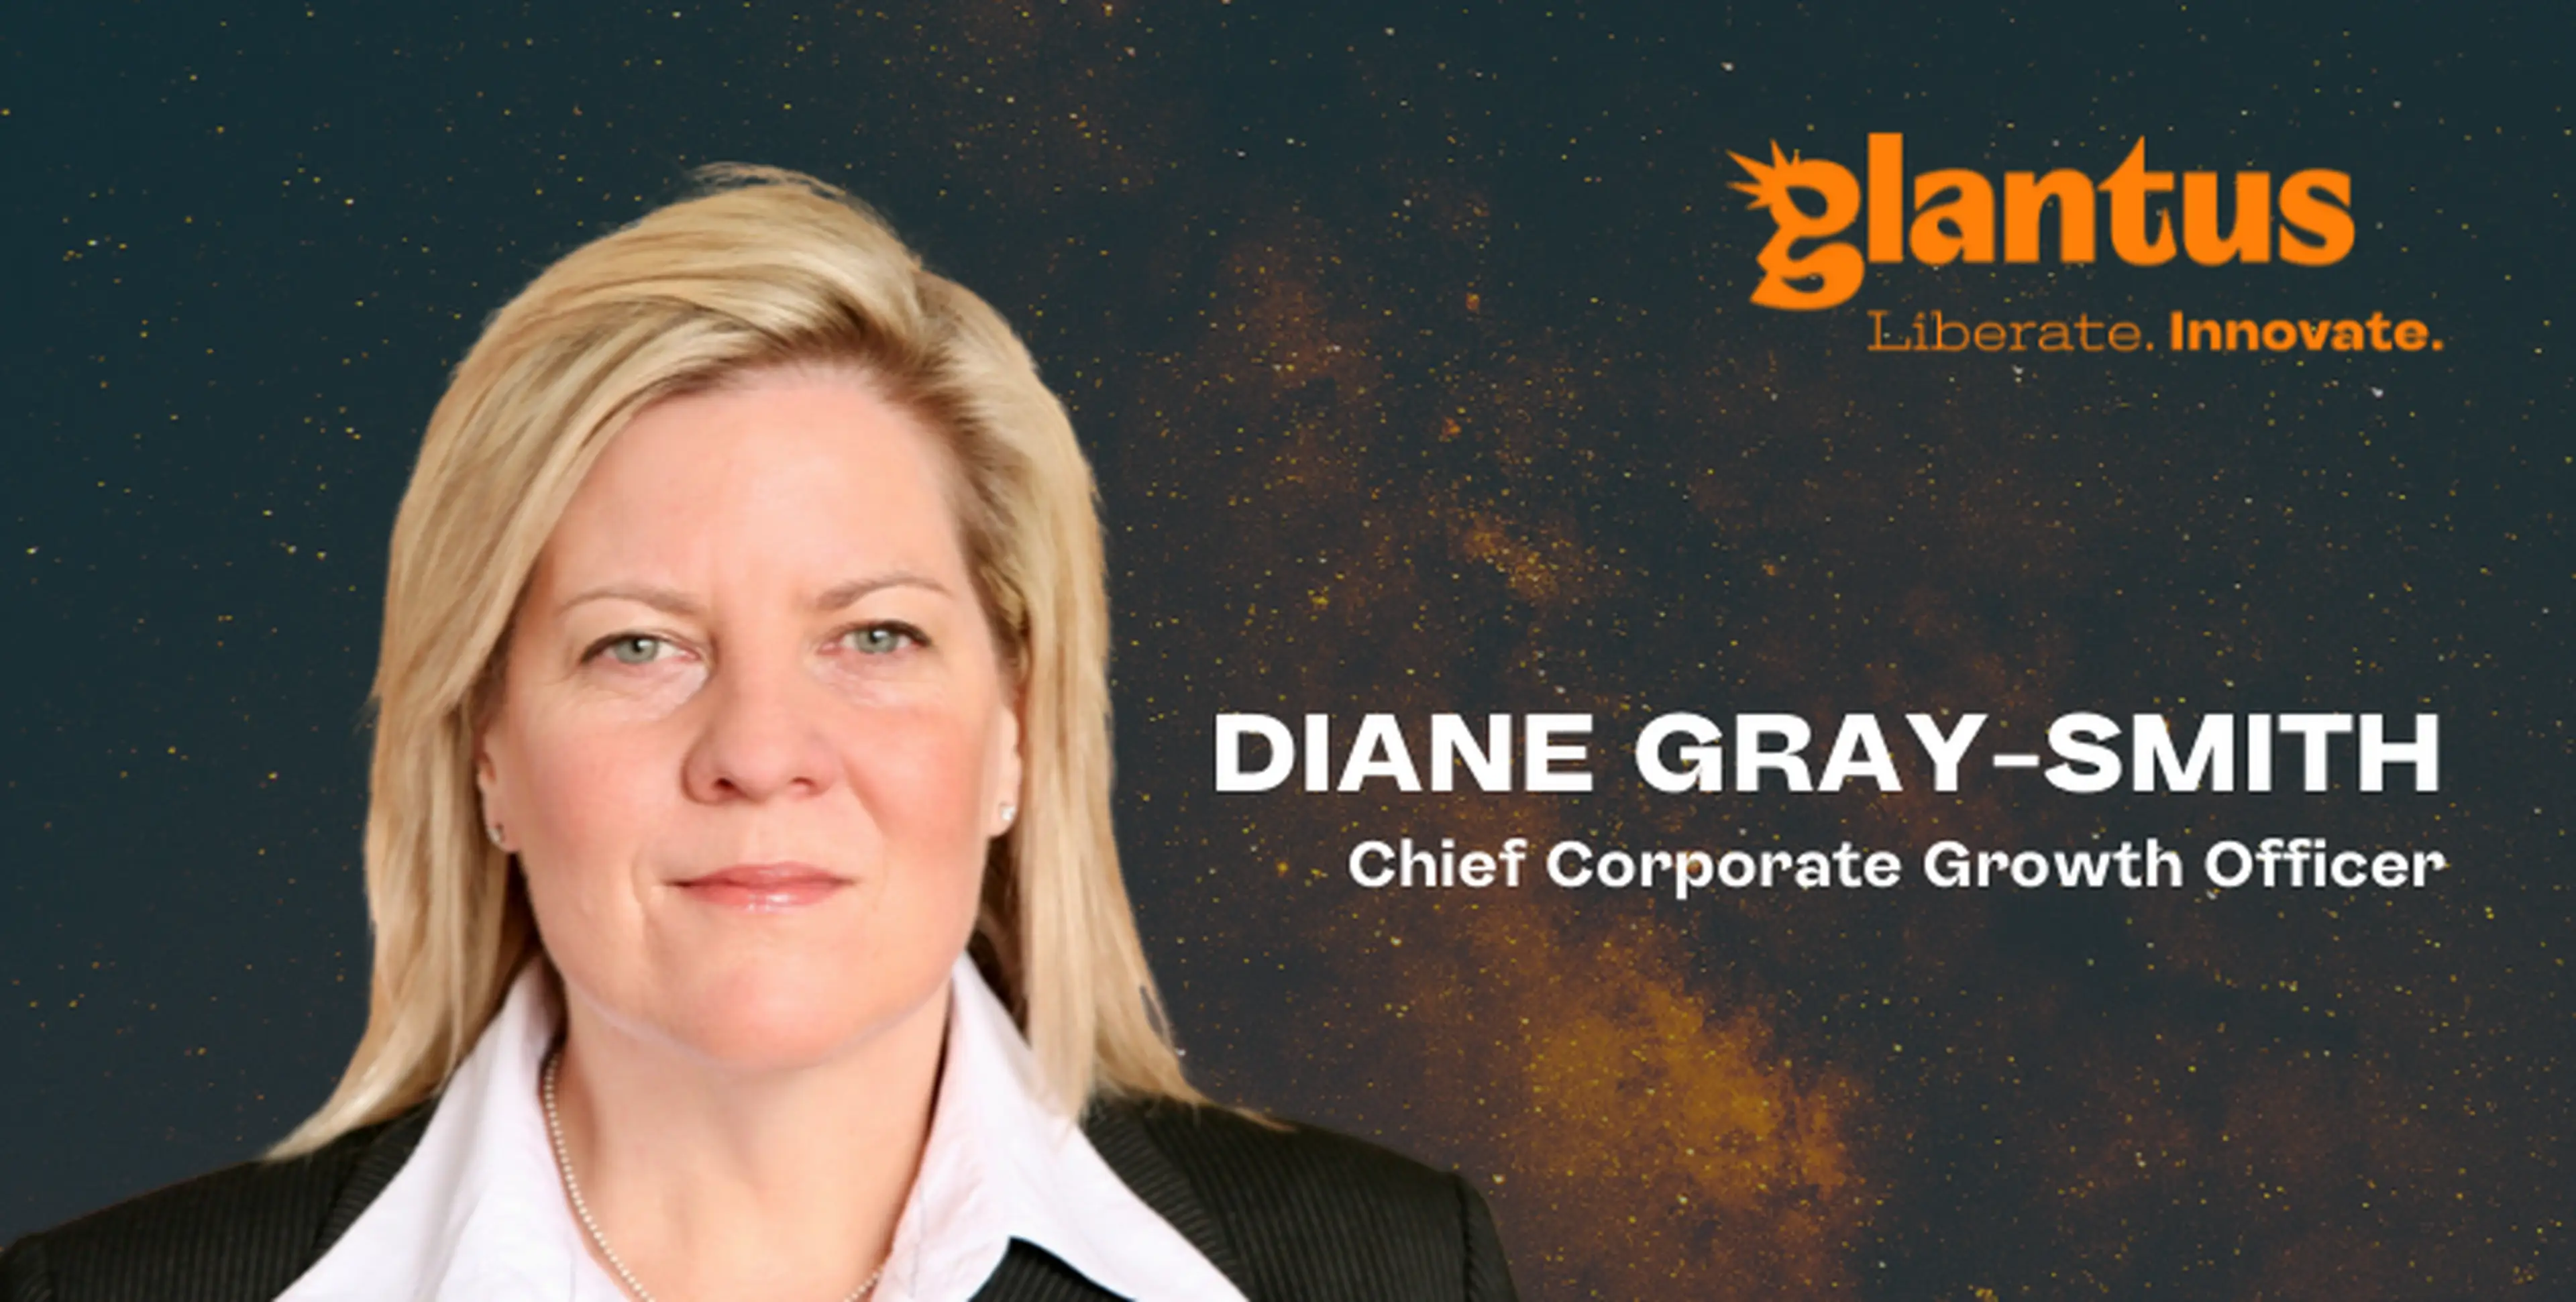 Diane Gray-Smith, Chief Corporate Growth Officer, Glantus